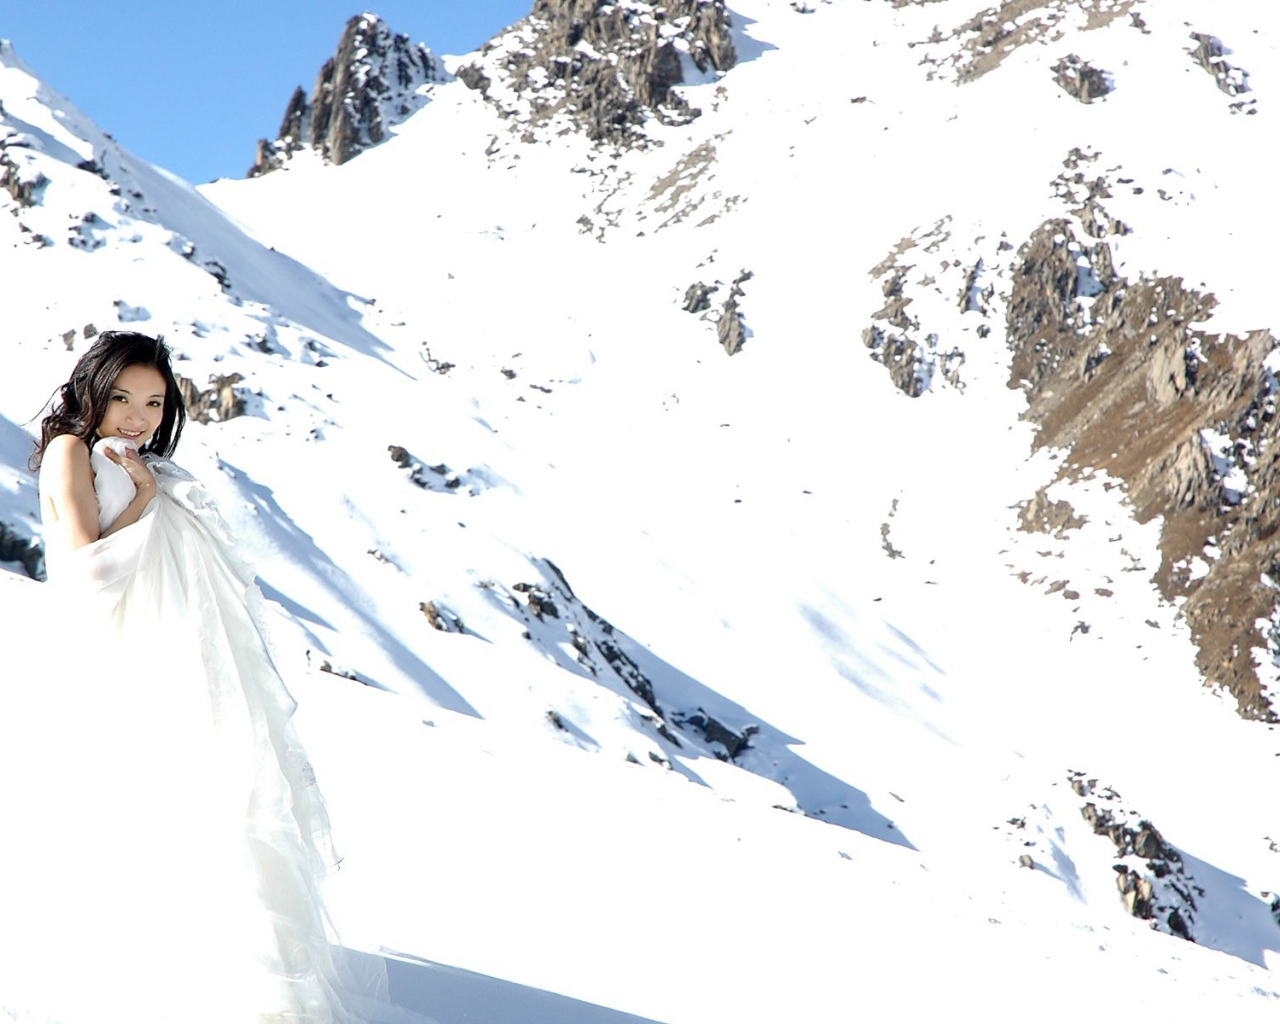 The bride in the snowy mountains